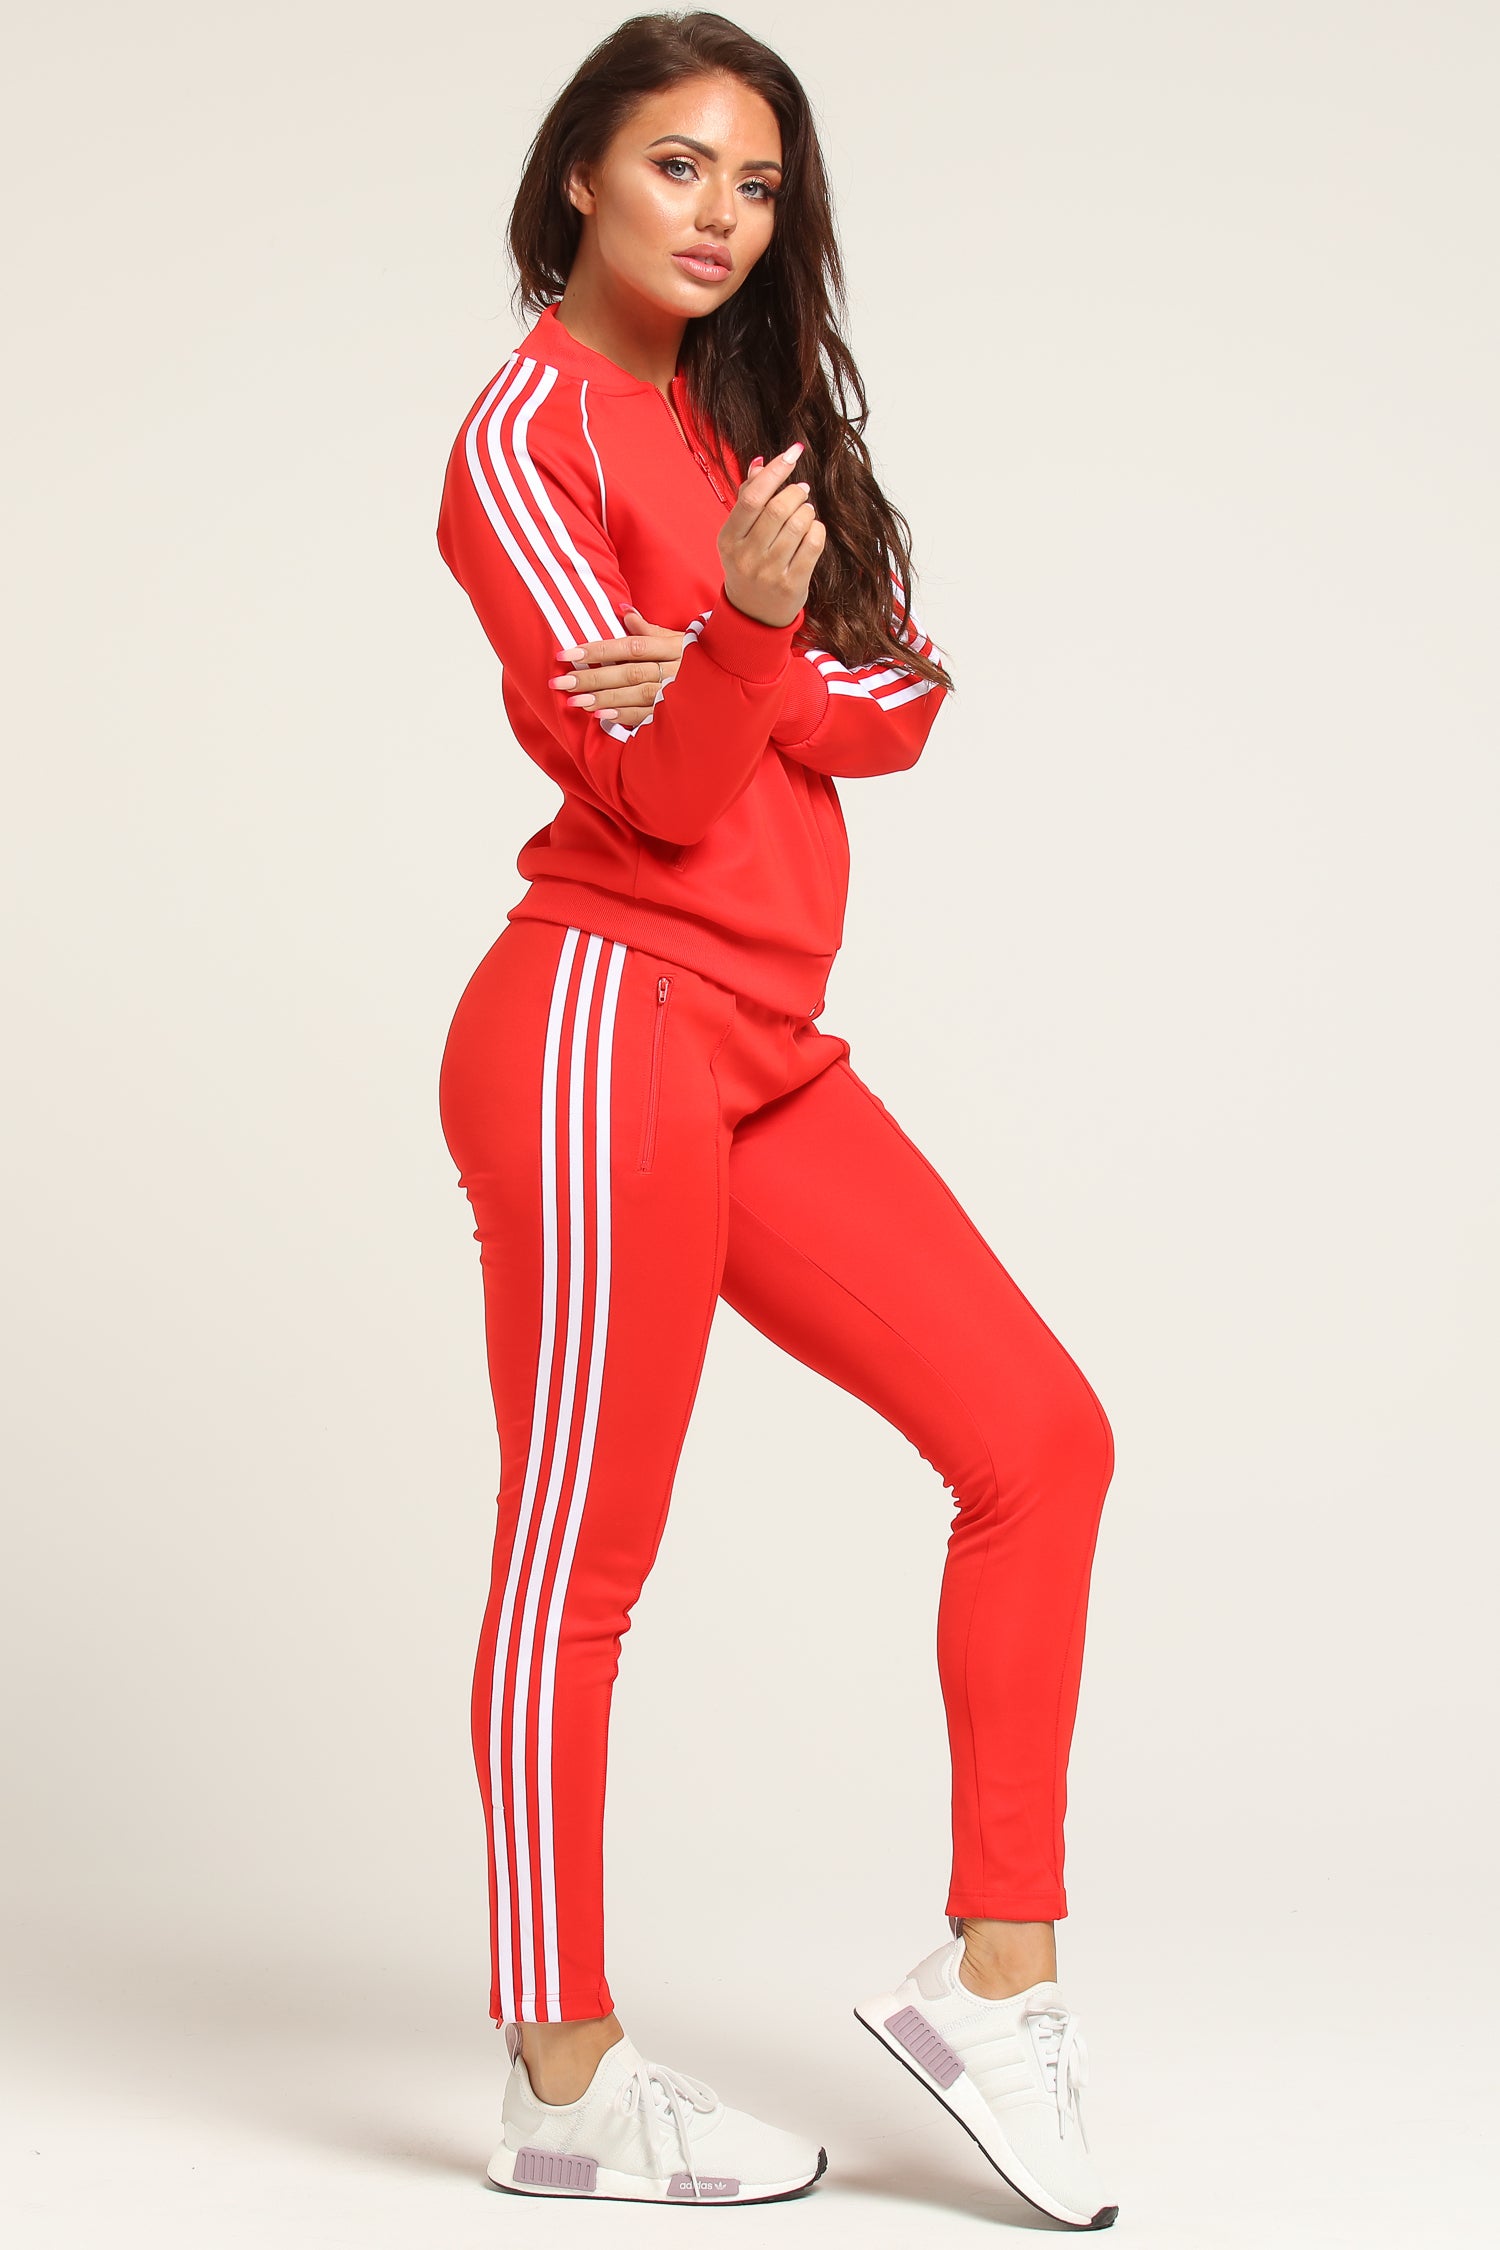 red adidas womens tracksuit